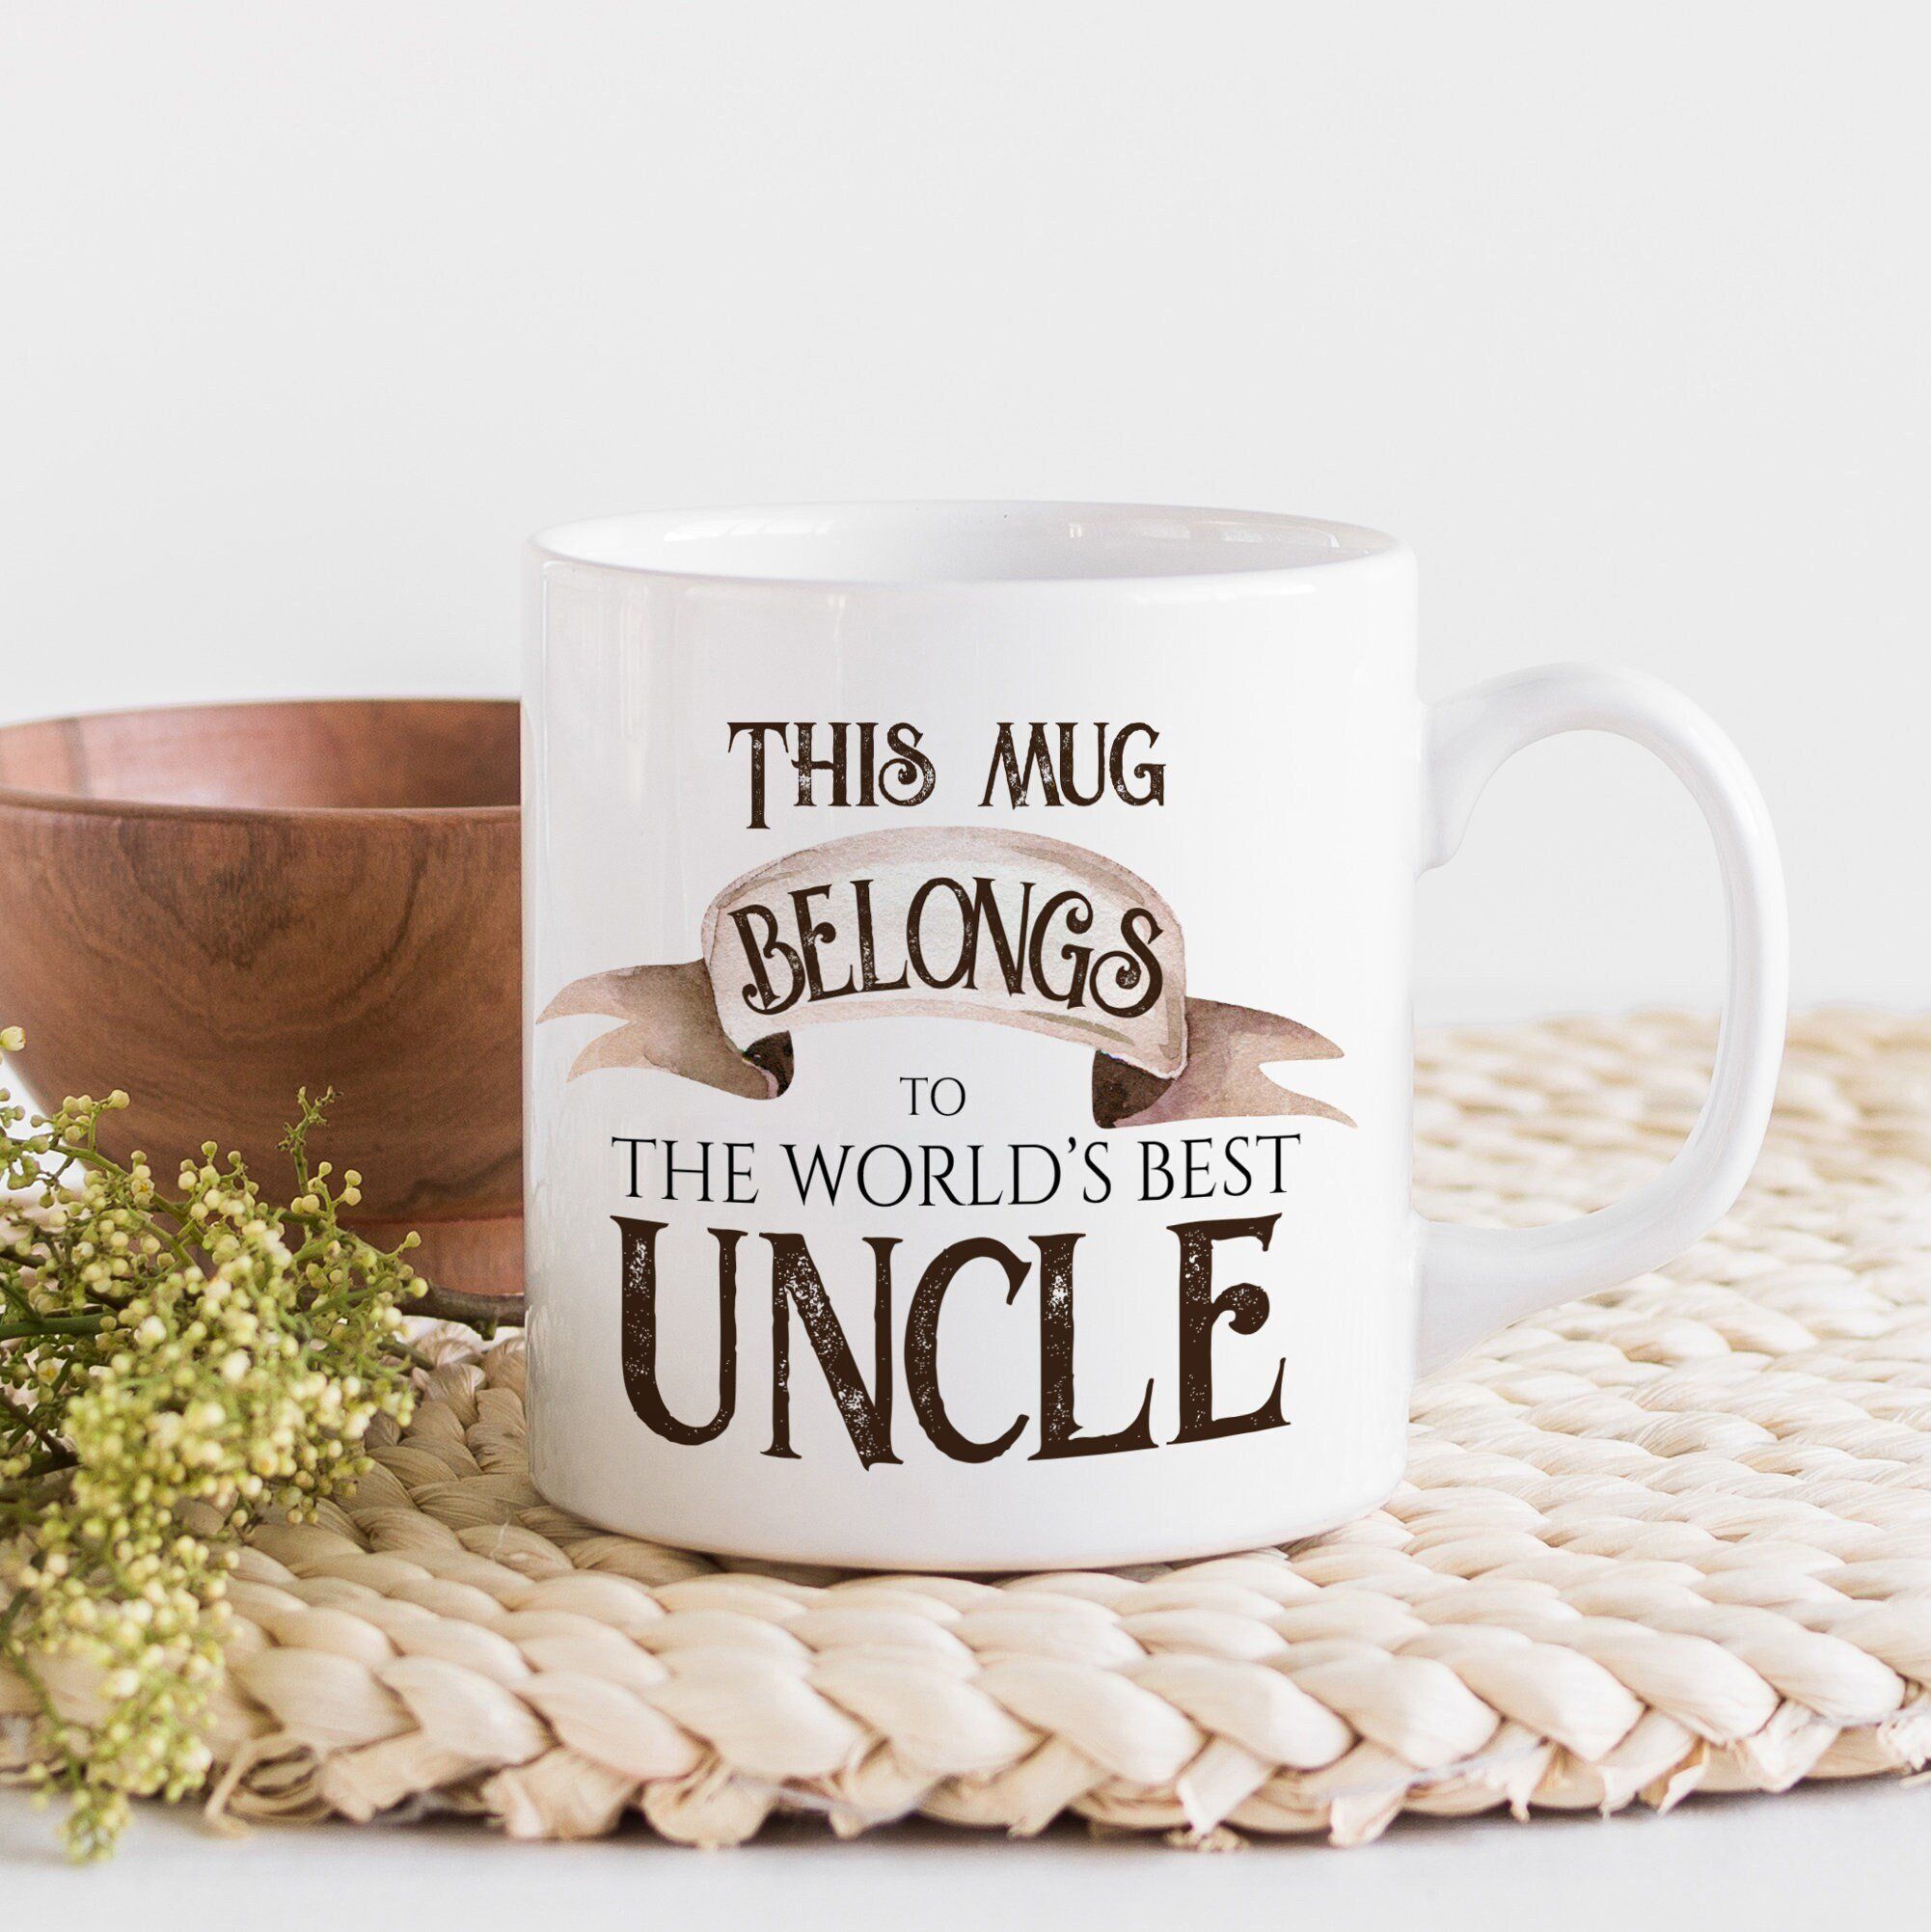 This mug belongs to the world's best uncle, Father's Day gift, Christmas gift for uncle, Uncle present, Best uncle Ever